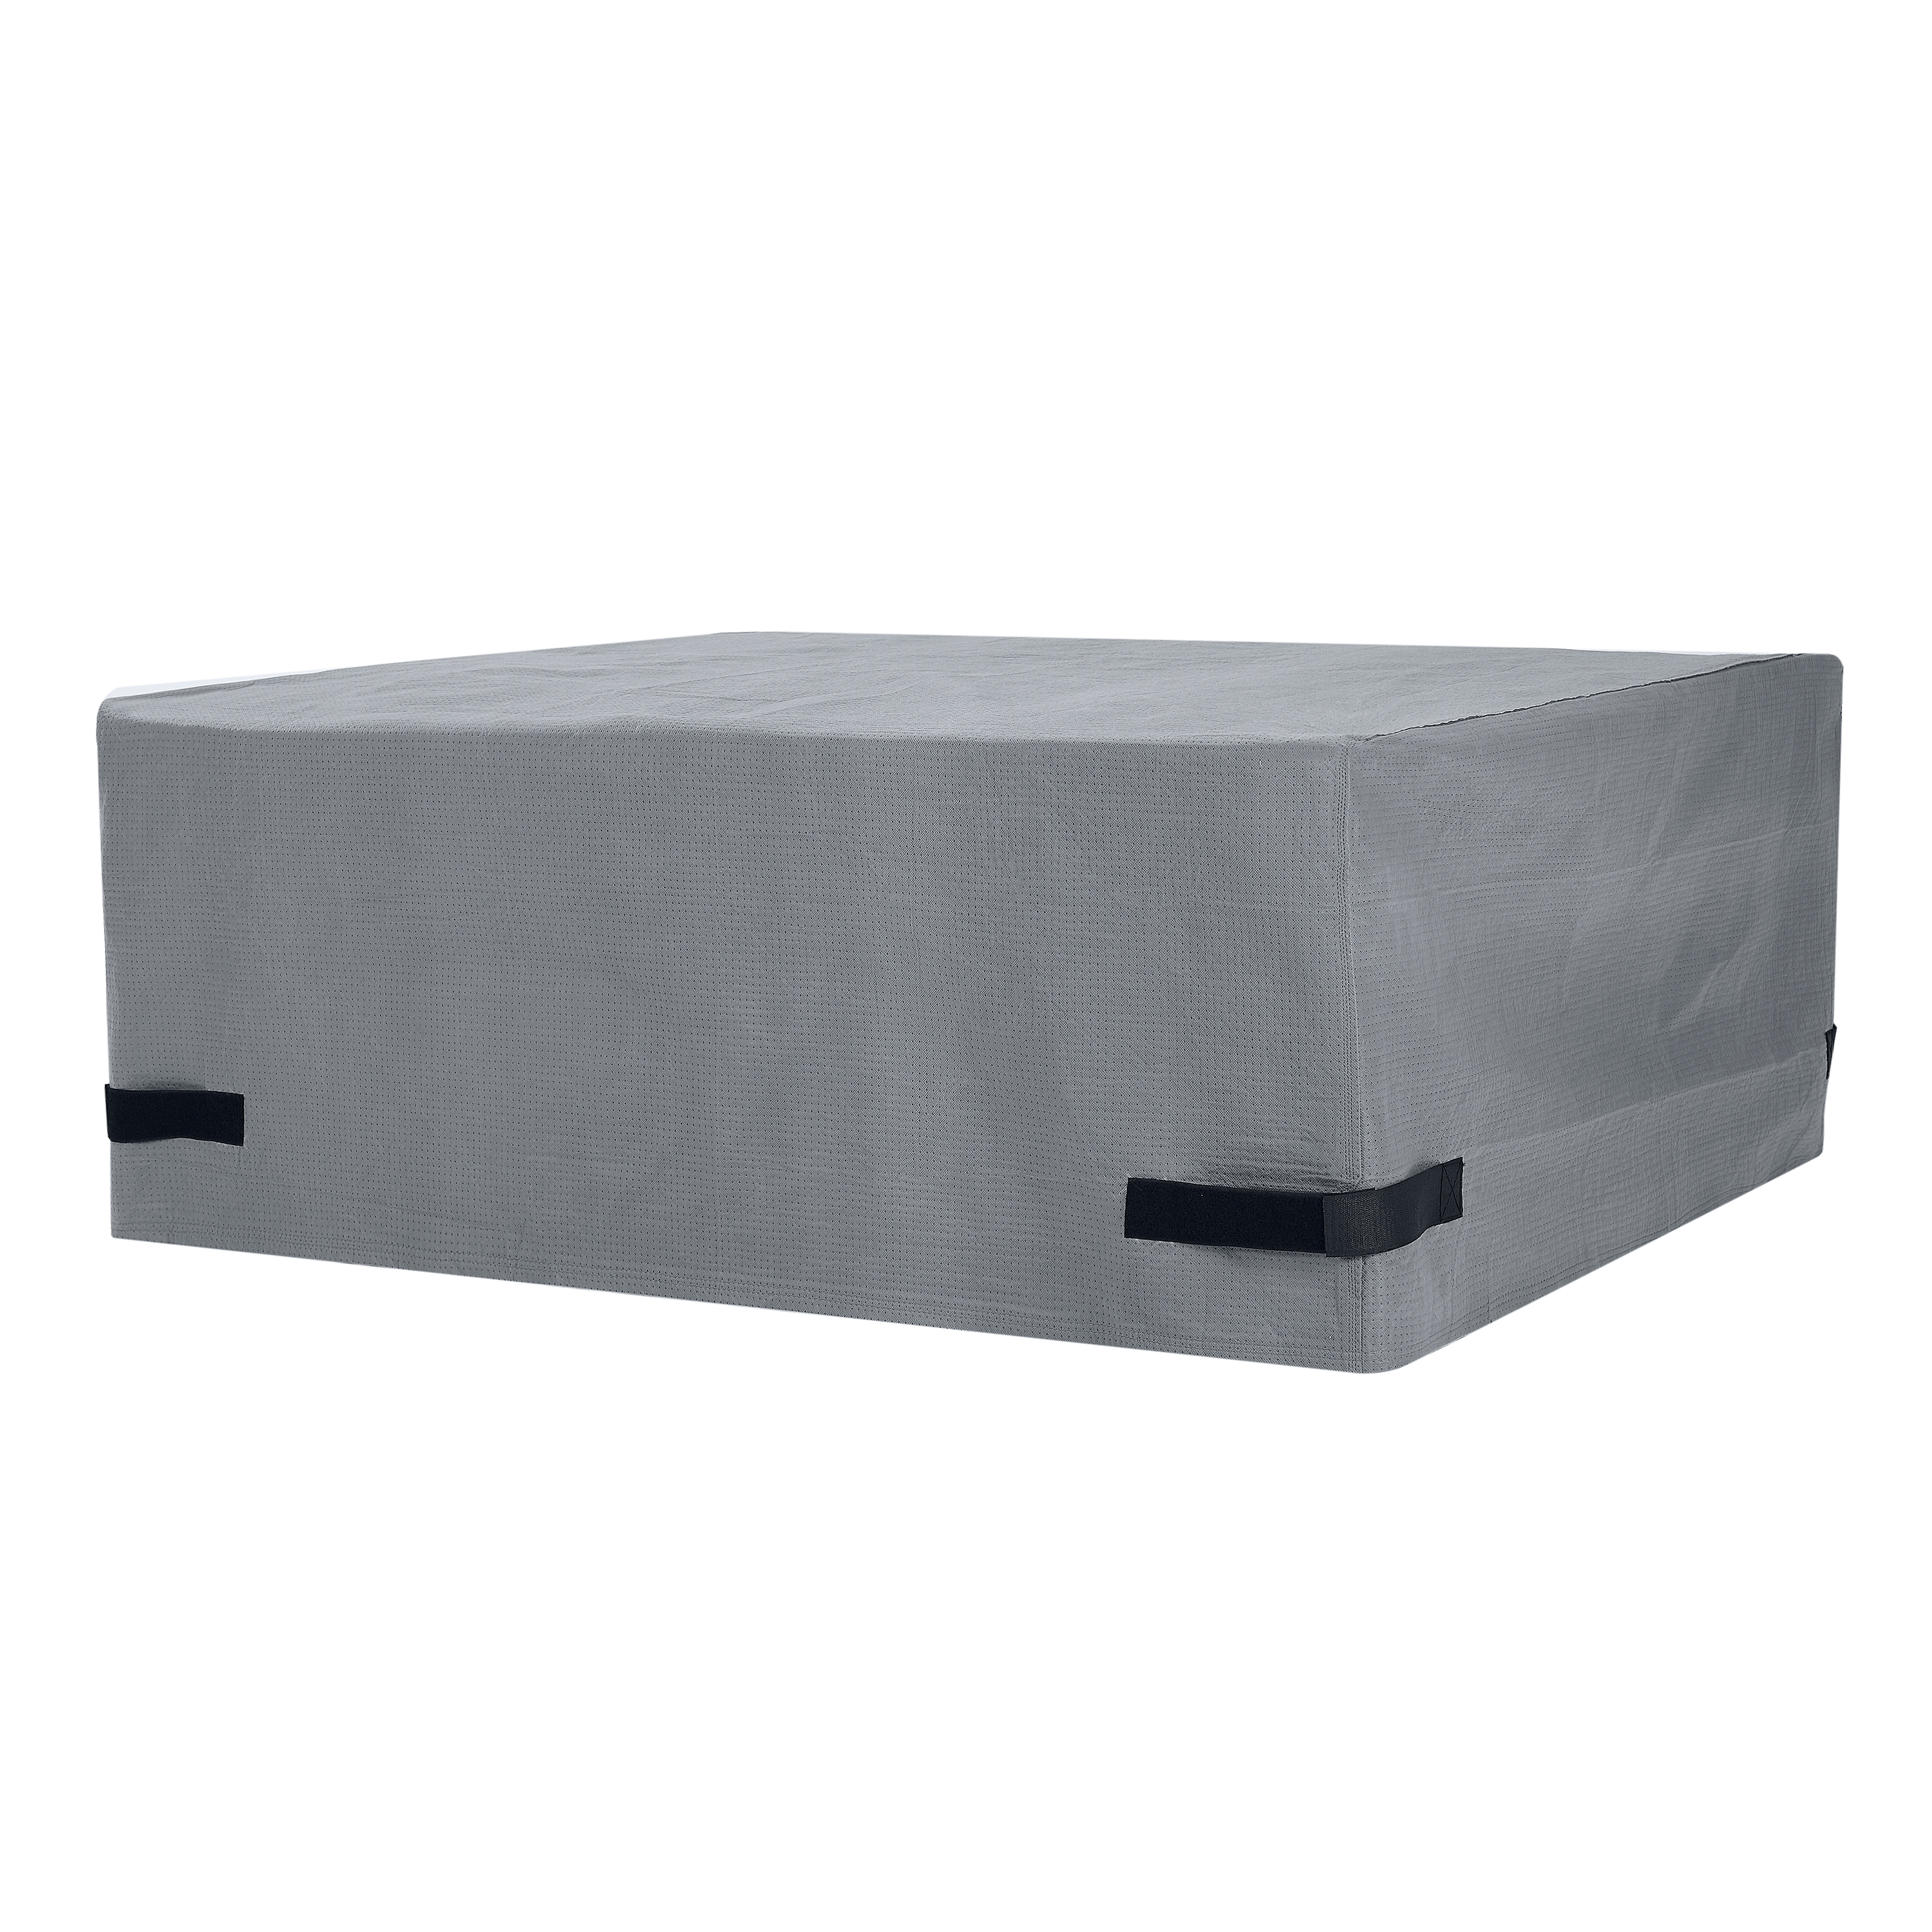 Mainstays Sandell 40 Inch Square Outdoor Fire Pit Table Cover in Gray - image 1 of 2